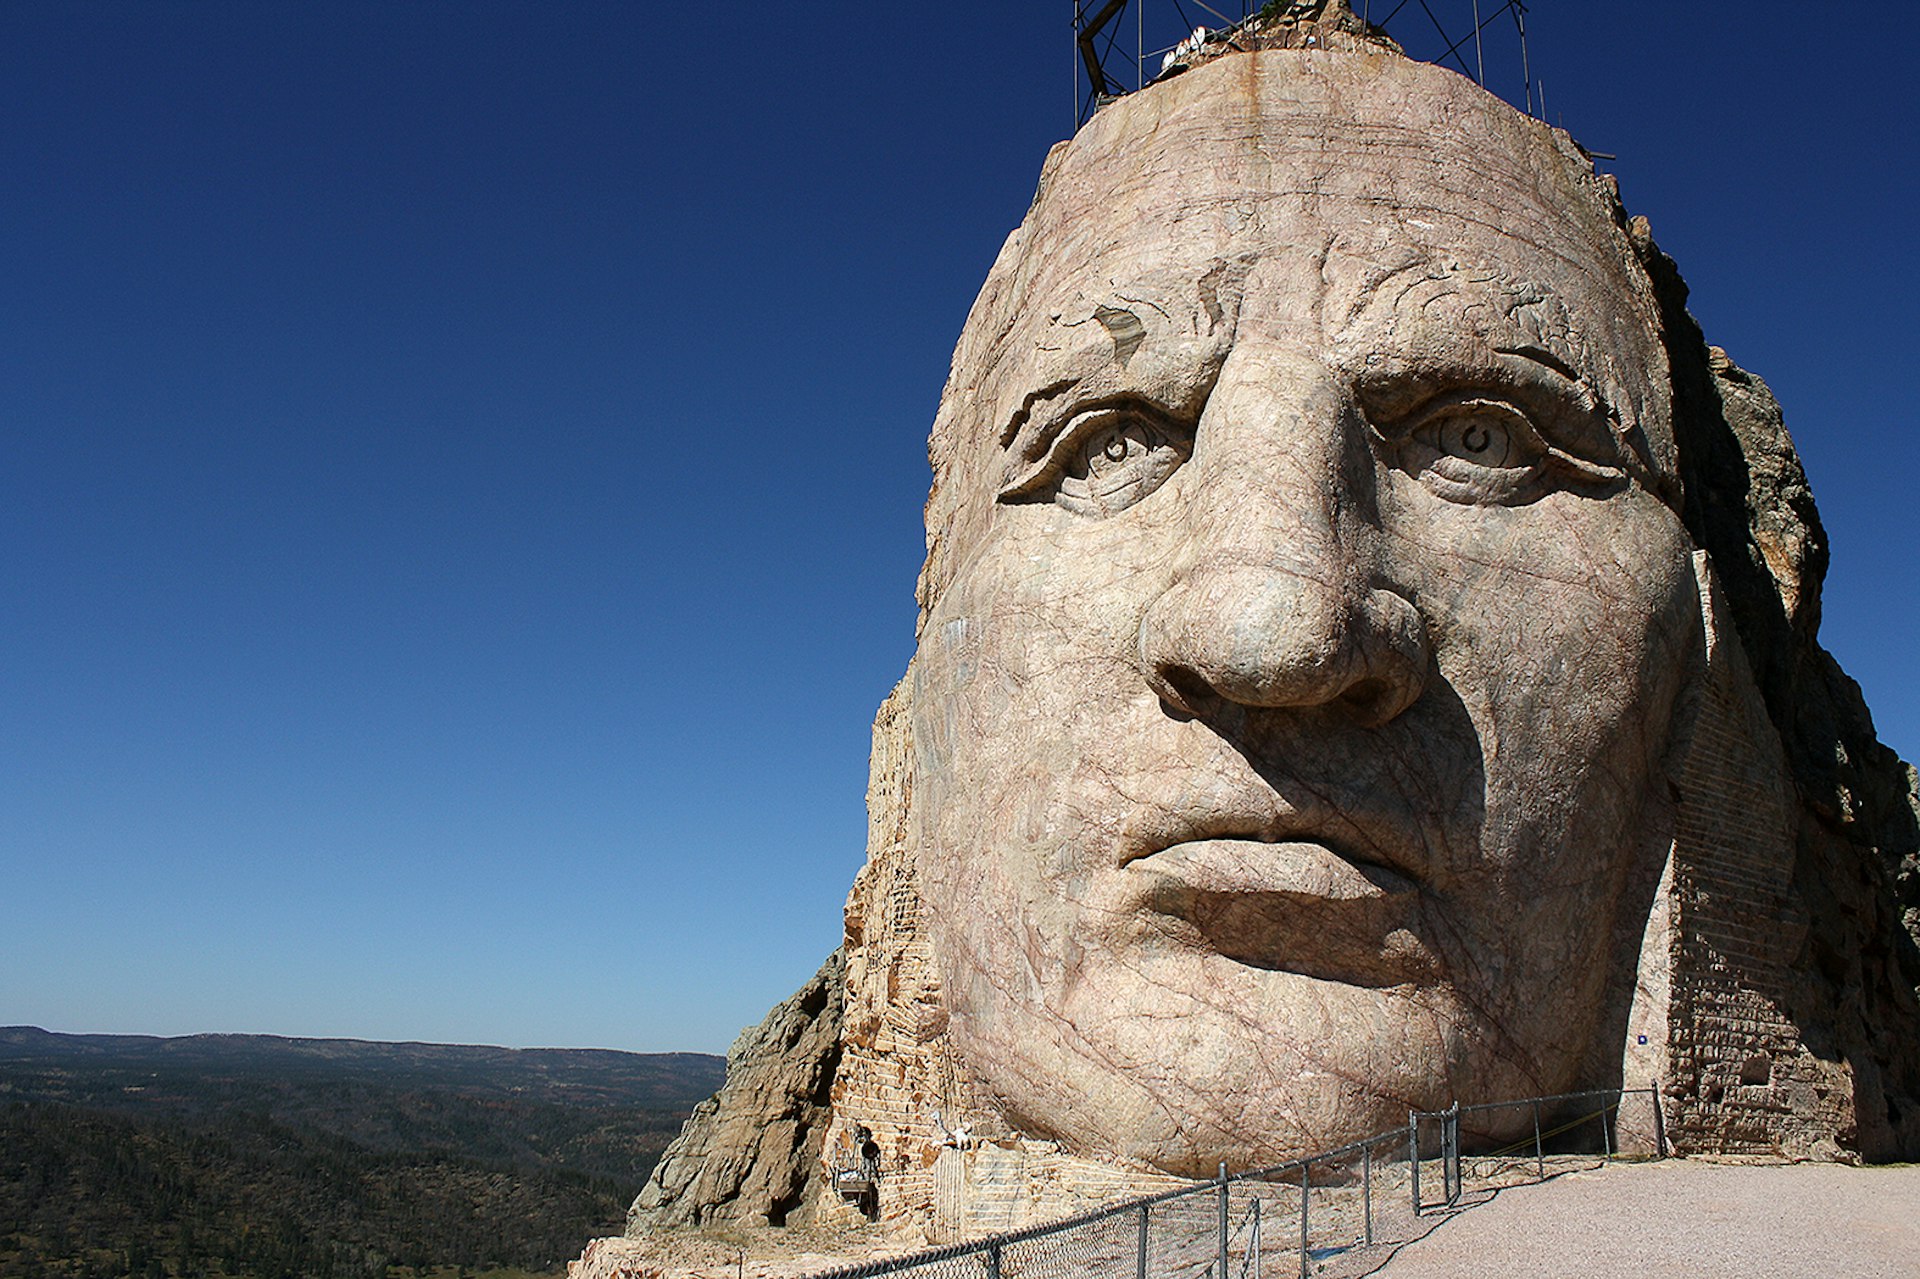 A close-up of Crazy Horse Memorial. Image by Alexander Howard / Lonely Planet